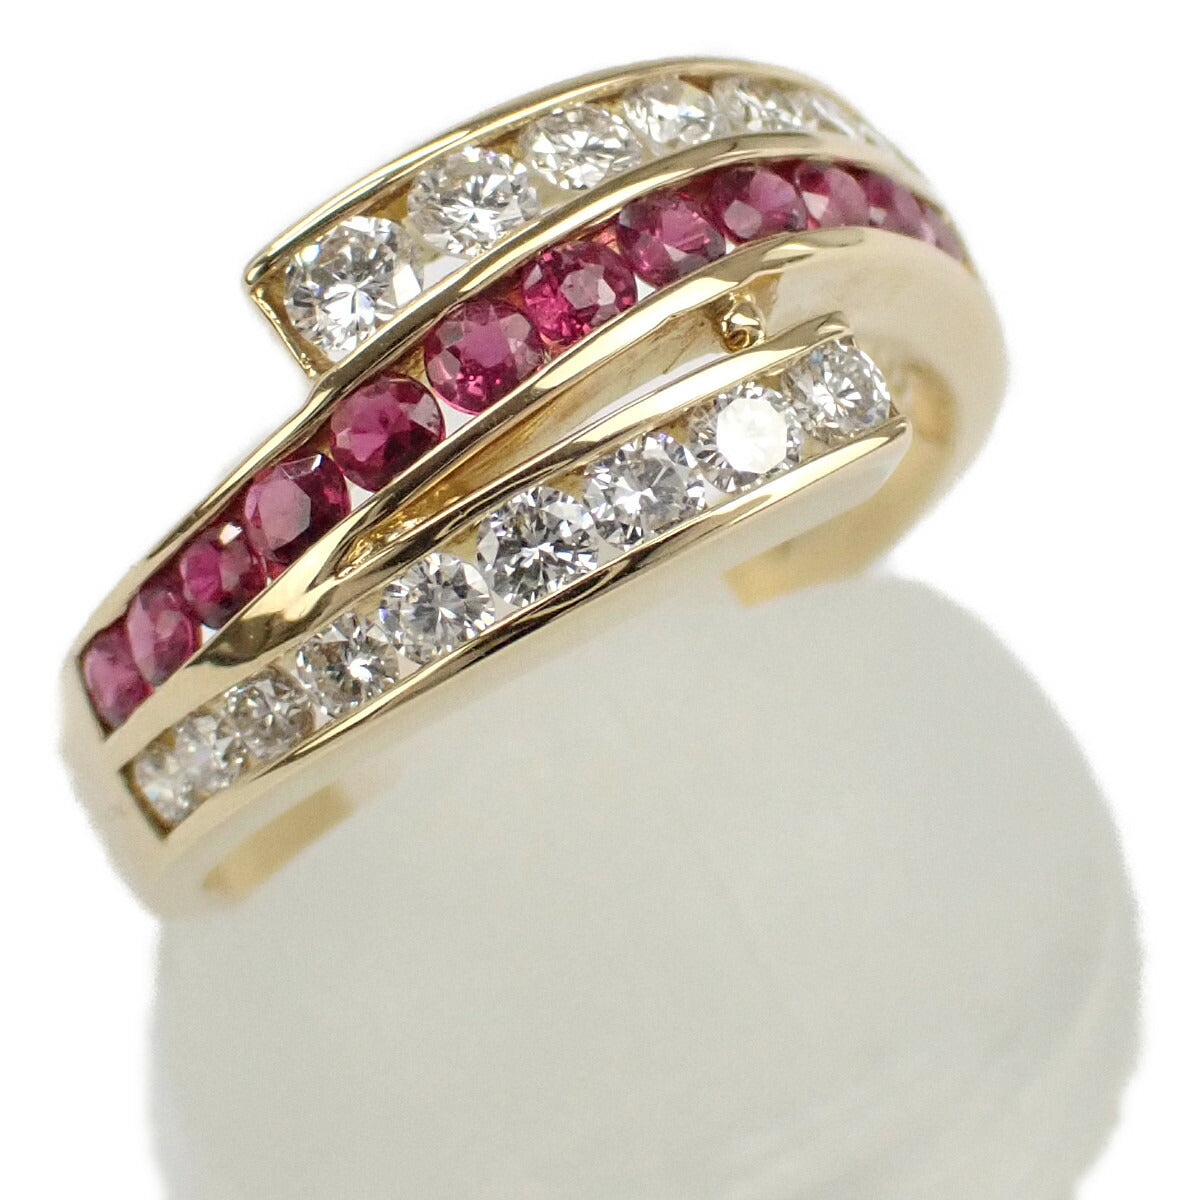 LuxUness  K18 Yellow Gold Designed Ring with Approx. 0.50ct Ruby and 0.57ct Diamond, Gold, Size 13 Ladies - Second Hand in Excellent condition